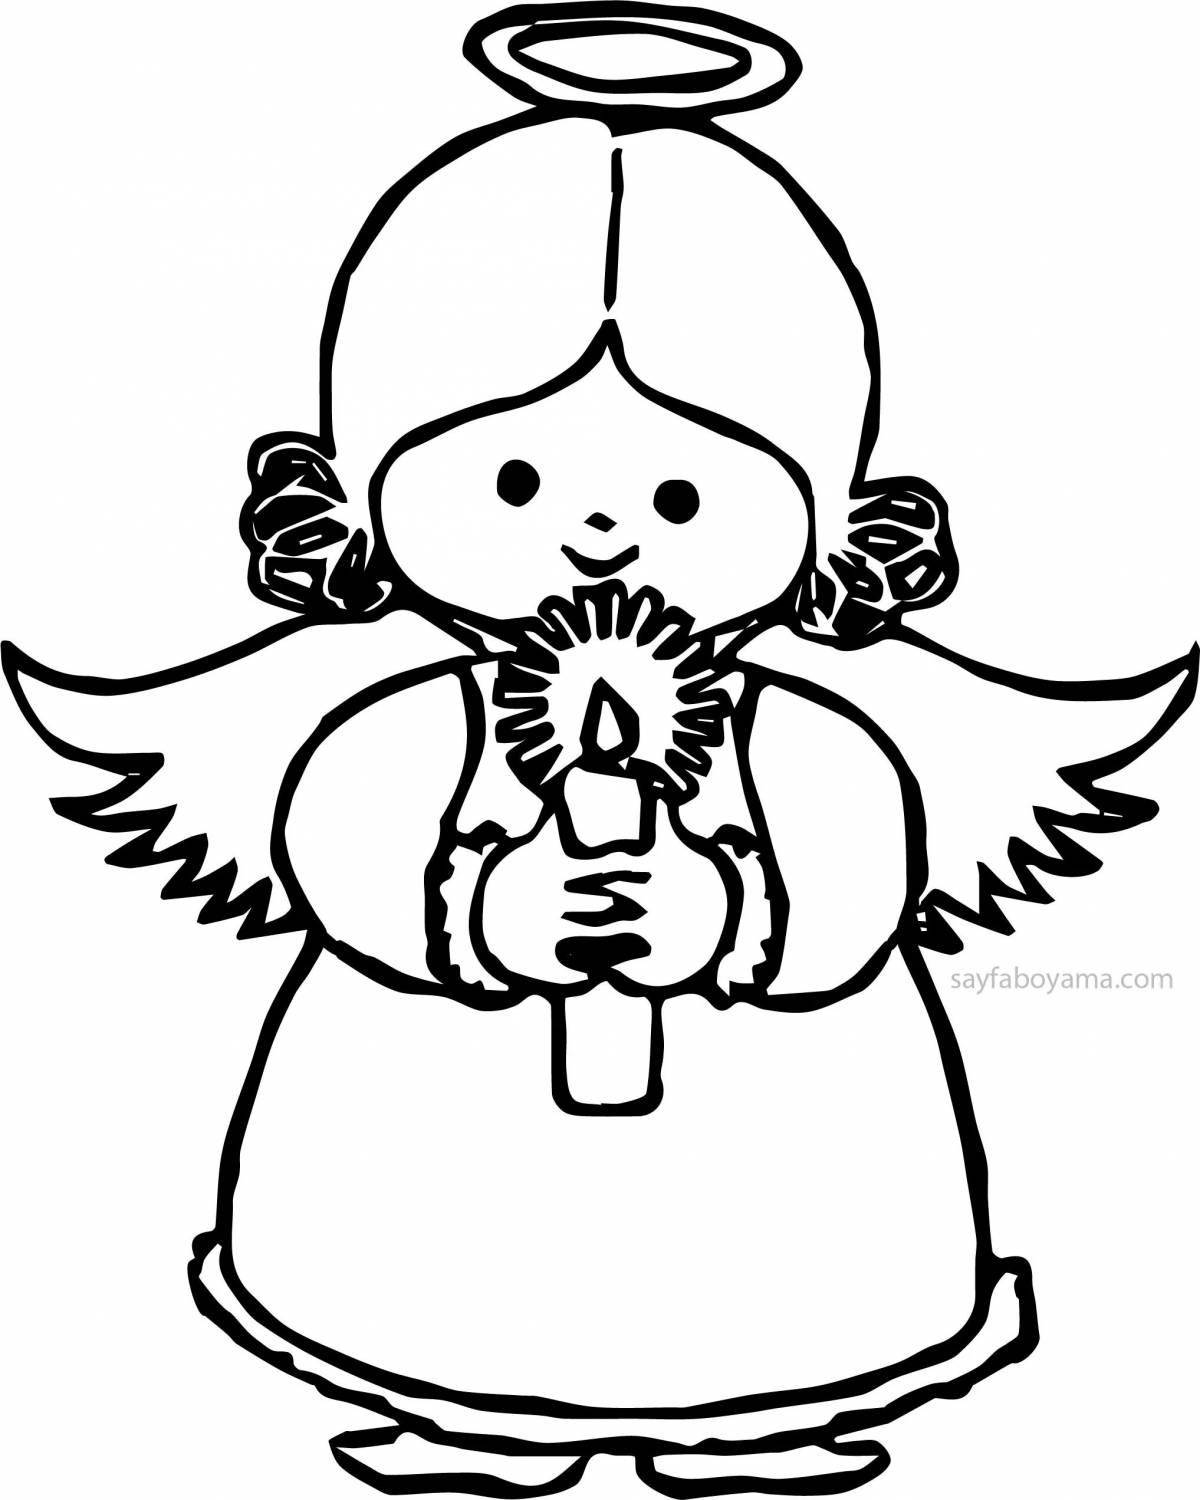 Great Christmas angel coloring page